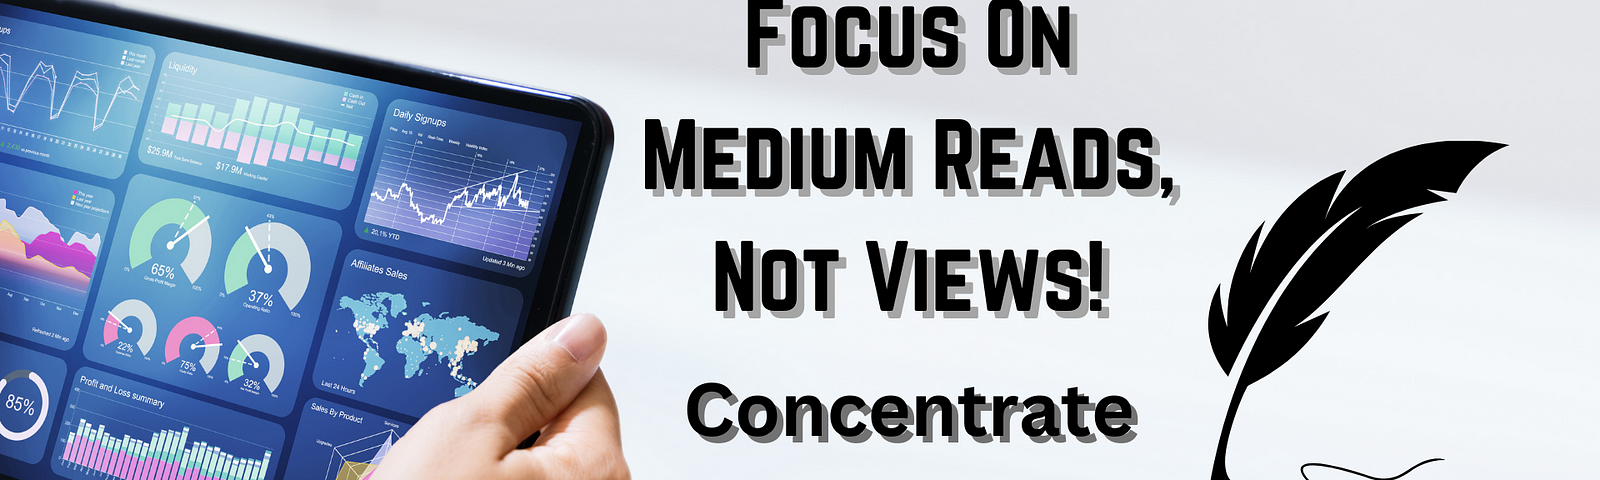 focus on medium reads and comments